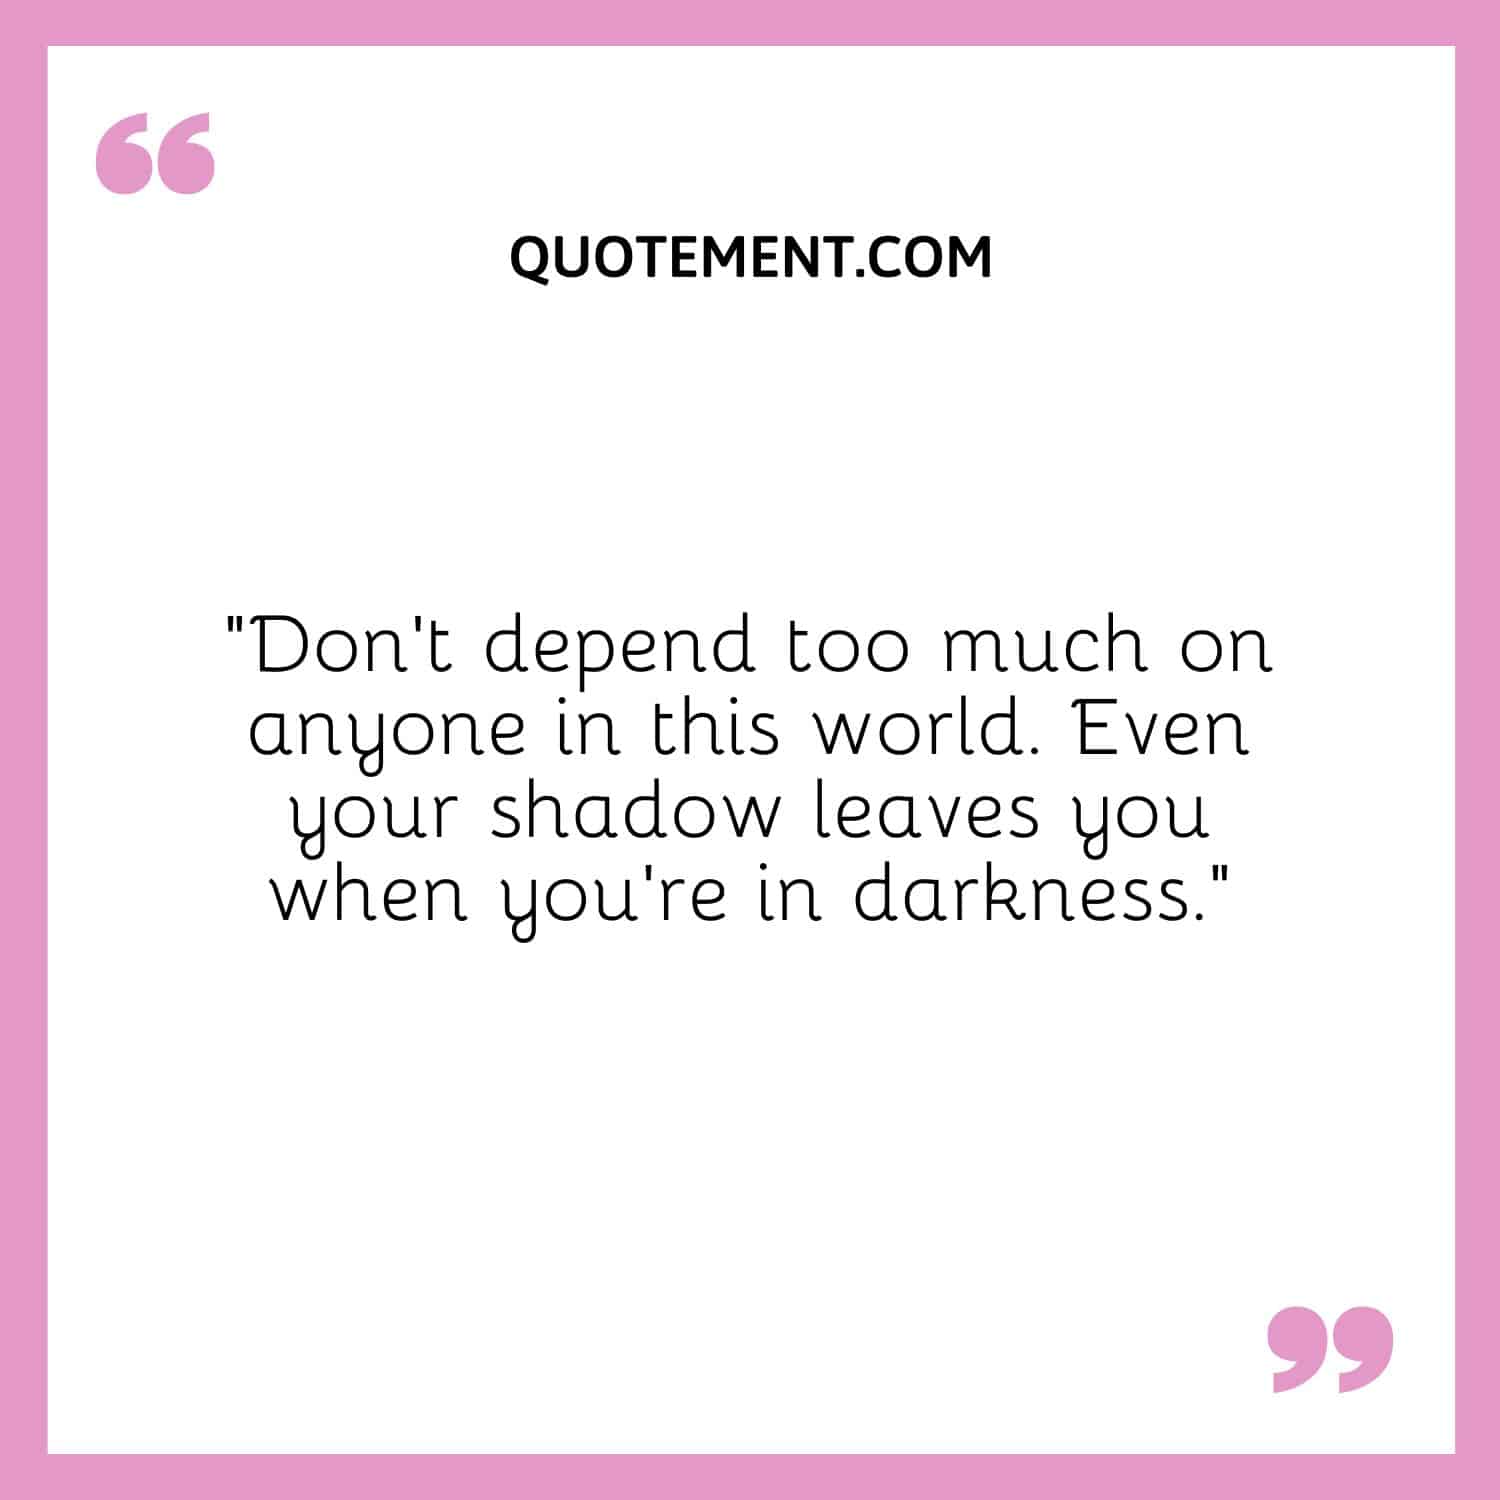 Don’t depend too much on anyone in this world